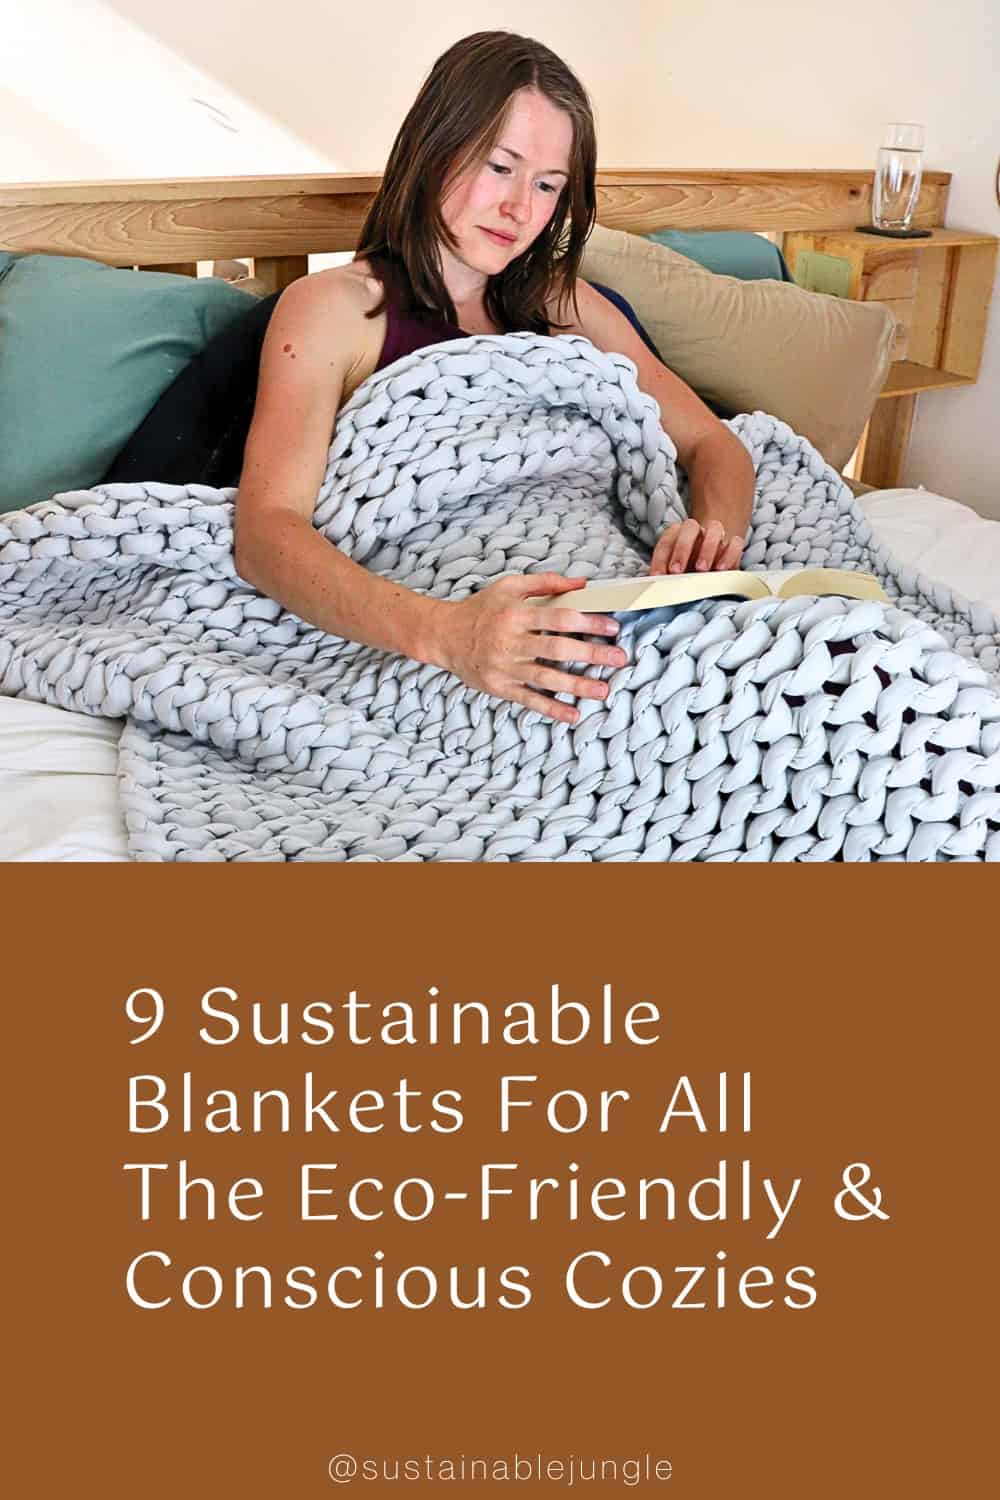 9 Sustainable Blankets For All The Eco-Friendly & Conscious Cozies Image by Sustainable Jungle #sustainableblankets #sustainablethrowblankets #ecofriendlyblankets #ecothrowblanket #sustainableweightedblankets #bestsustainableblankets #sustainablejungle